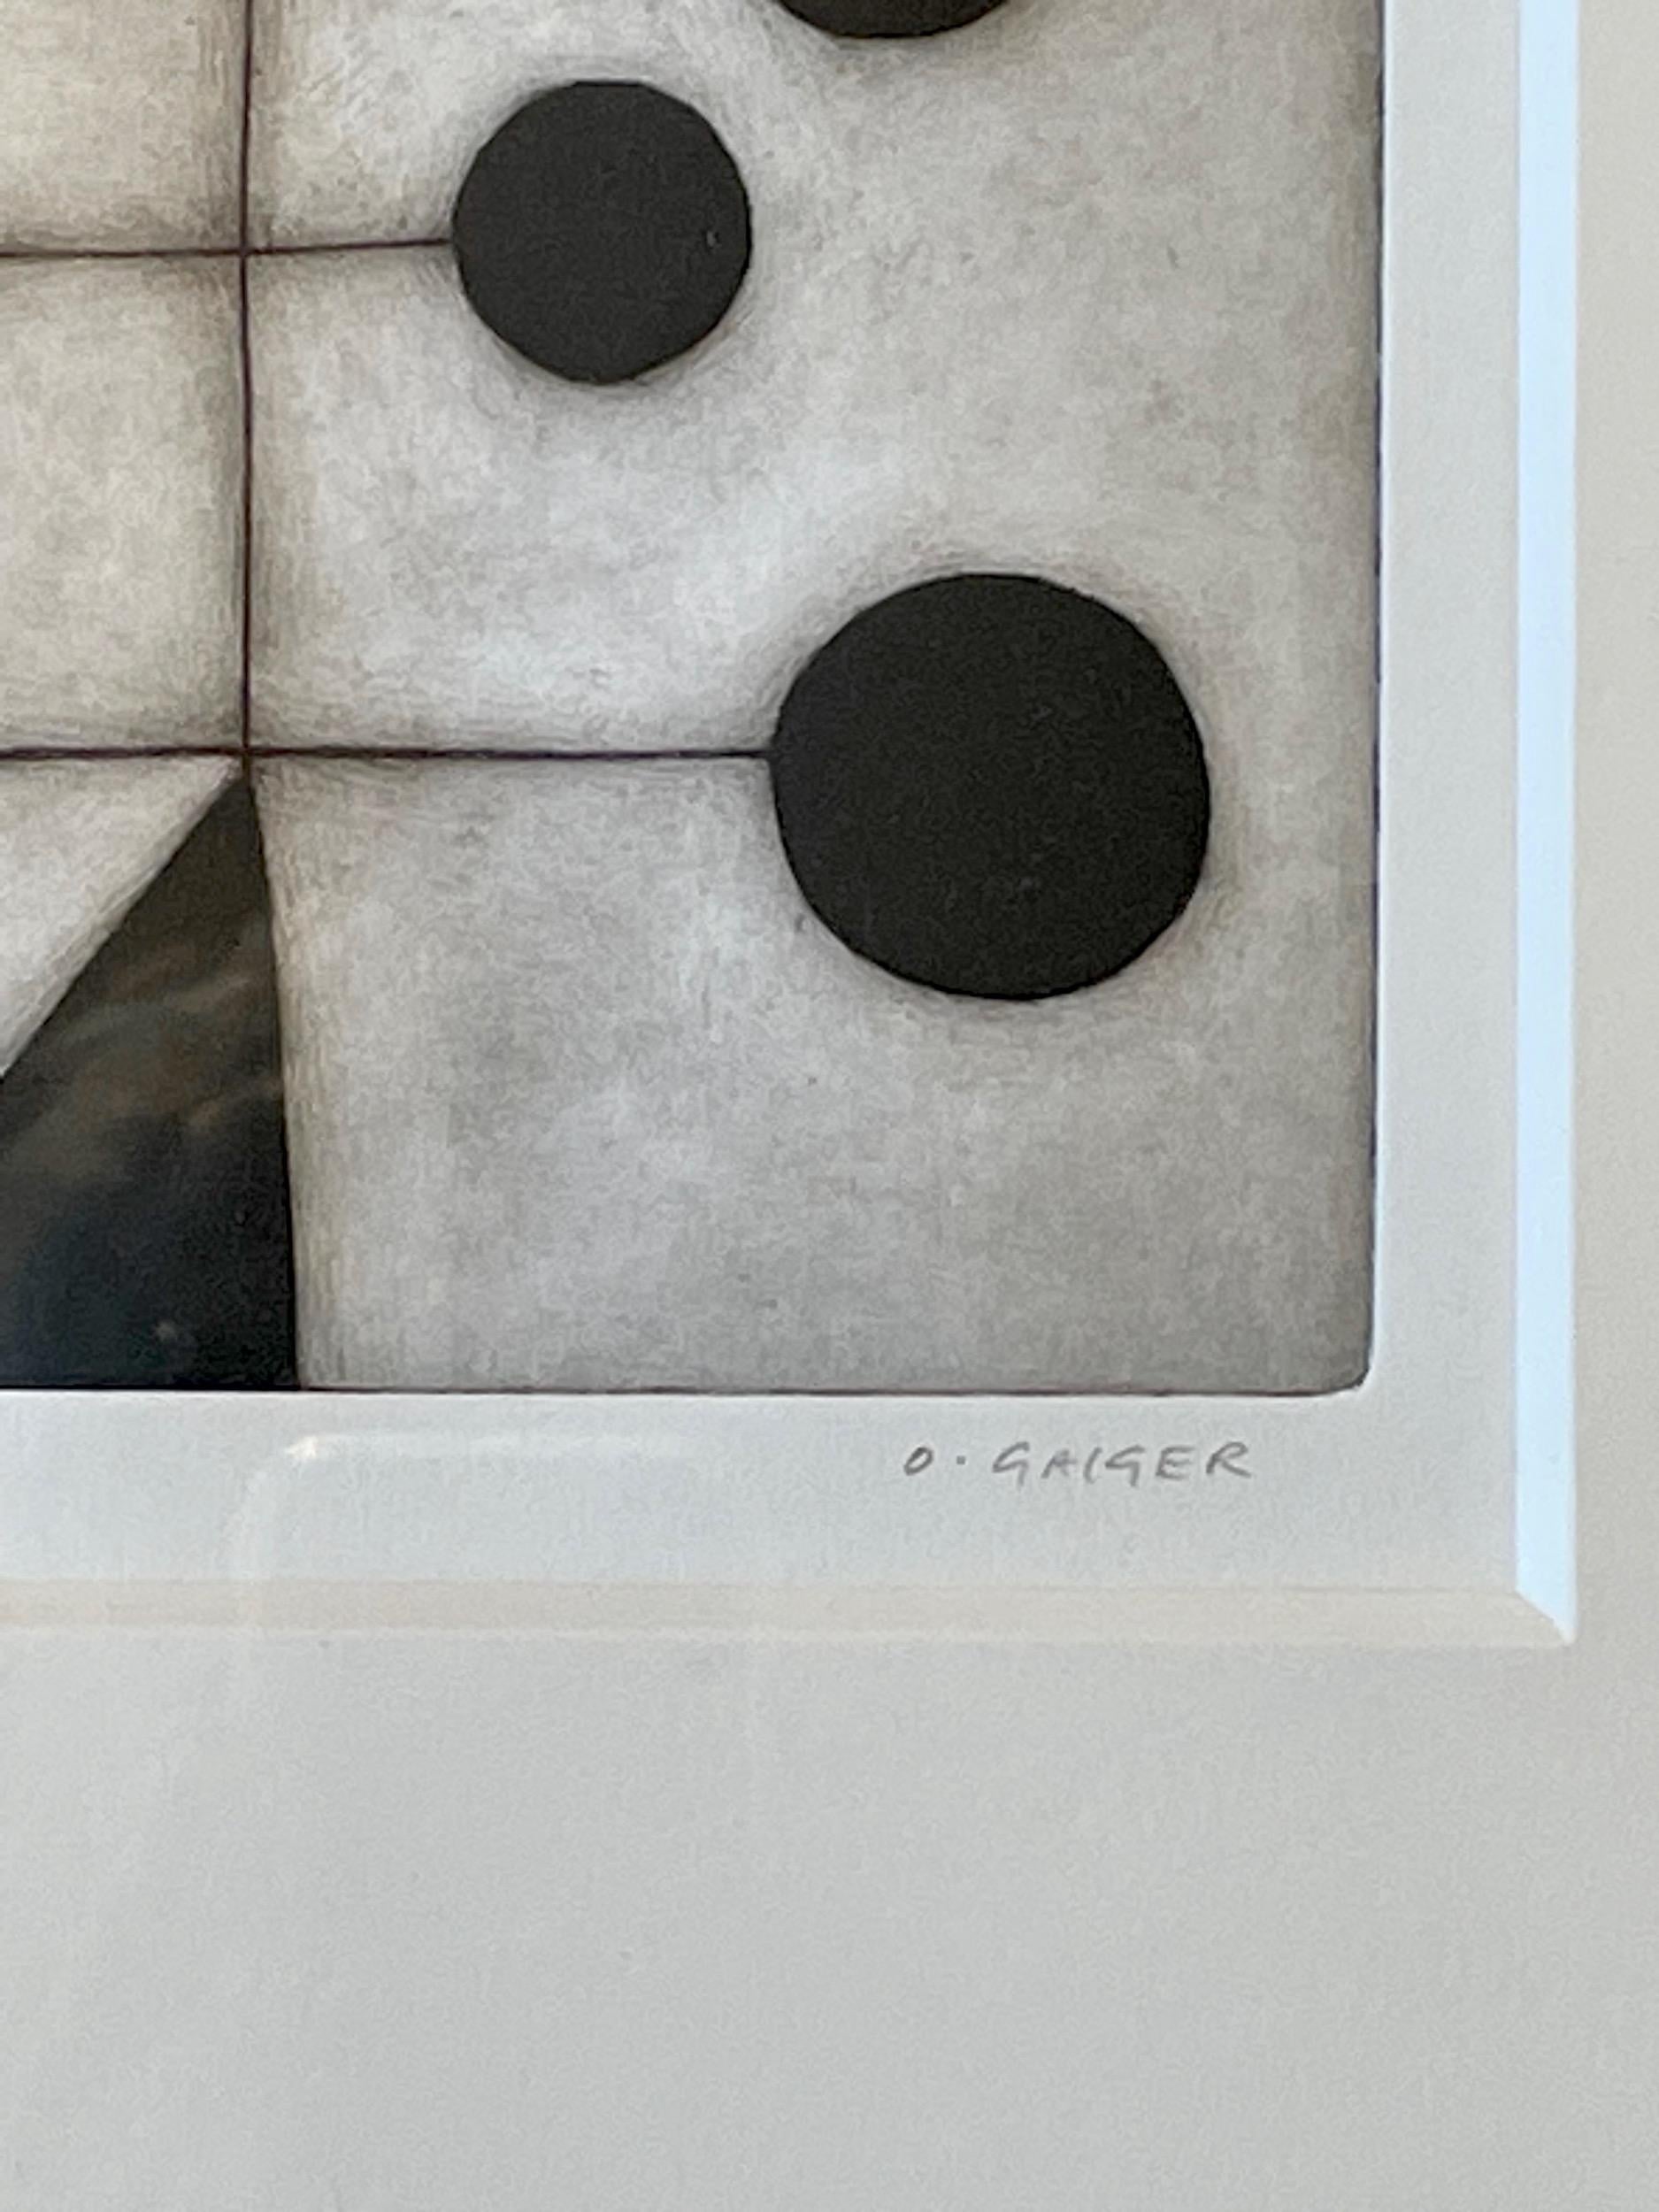 Contemporary abstract black and white etching by English artist Oliver Gaiger.
Matted and framed in a black wood frame.
Part of a large collection of black and white etchings by the artist
Oliver Gaiger was born in 1972 in Uganda and lives and